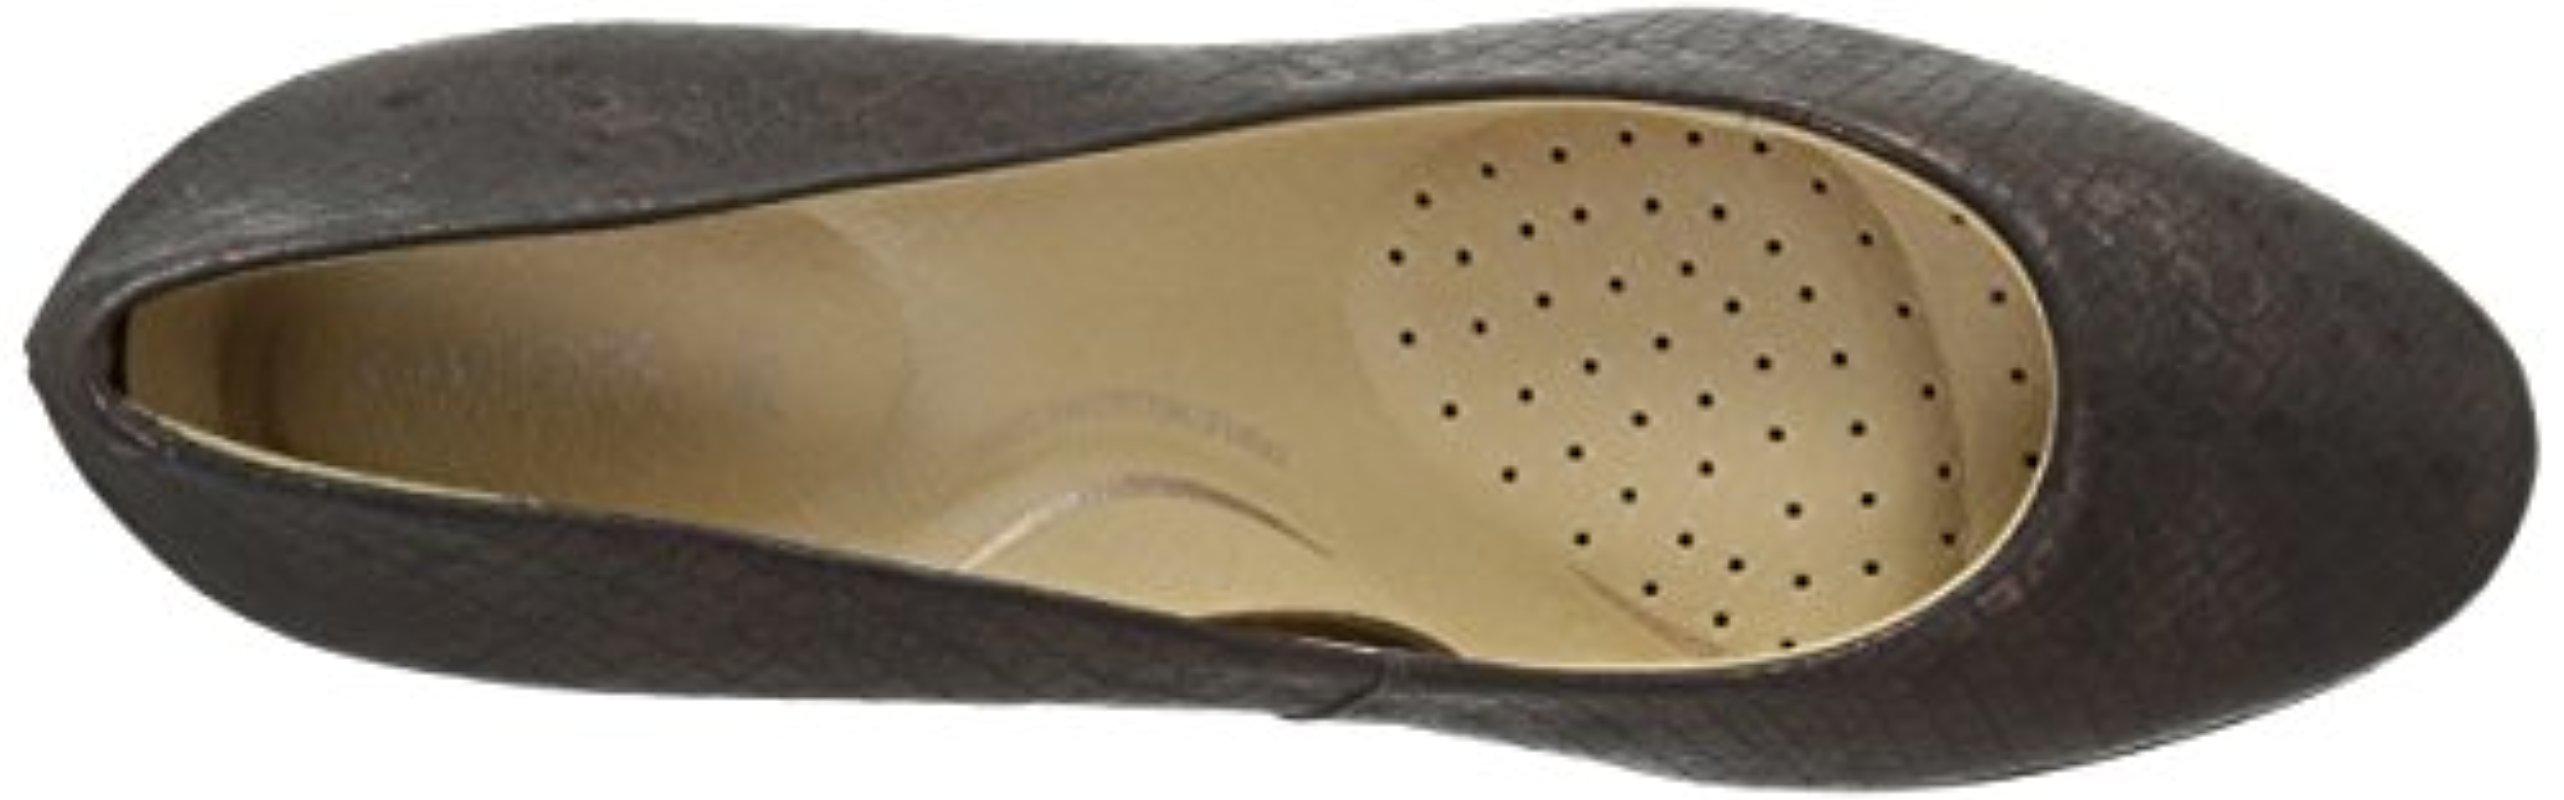 Geox D Annya C Closed-toe Pumps in Chestnut (Brown) - Save 61% | Lyst